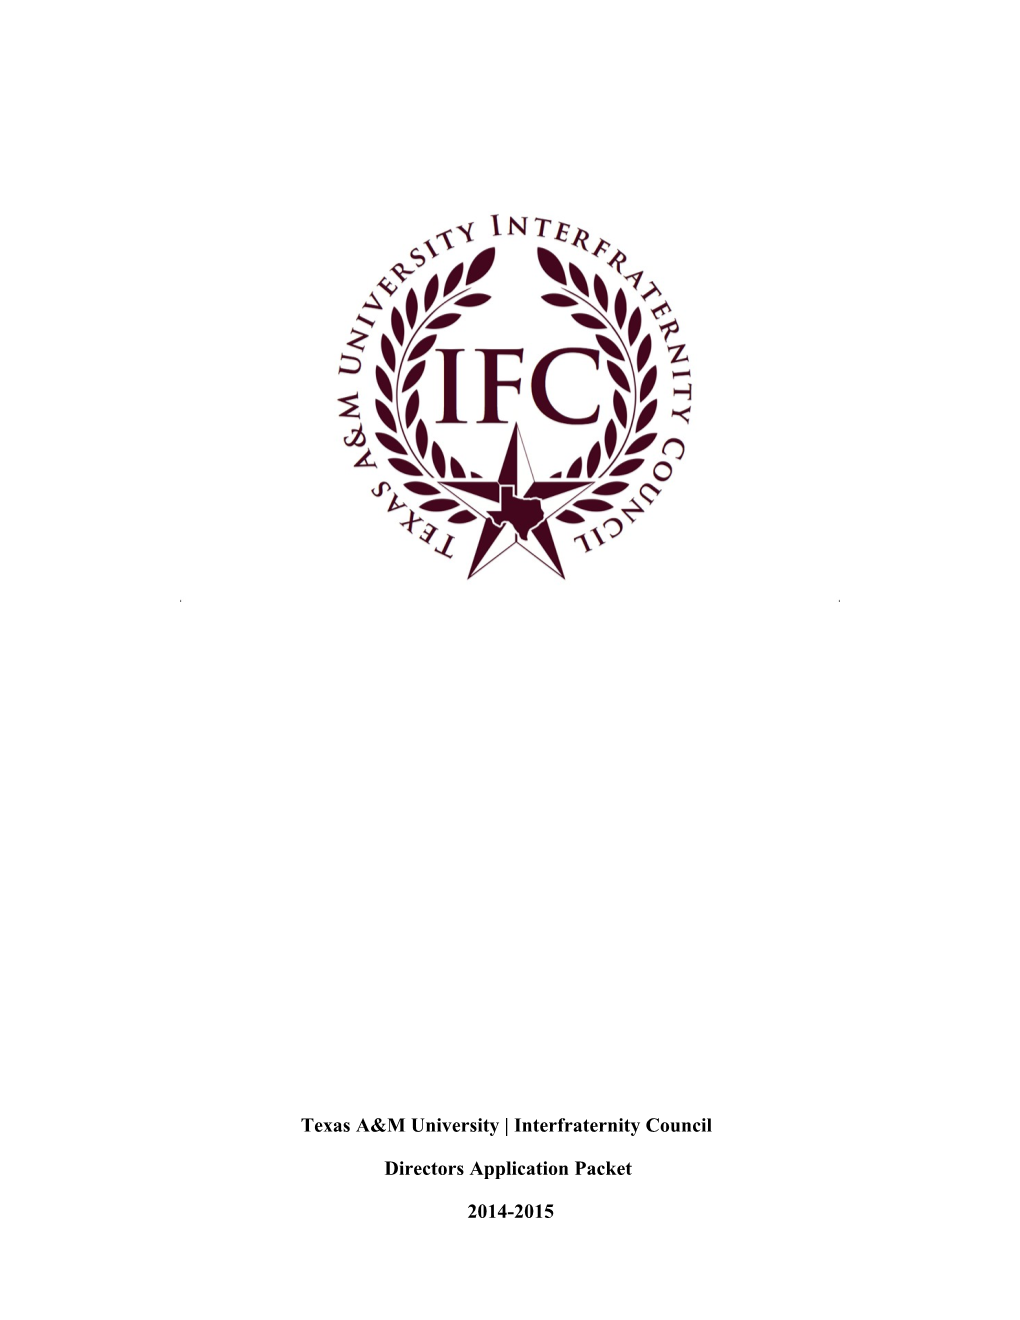 Texas A&M University Interfraternity Council